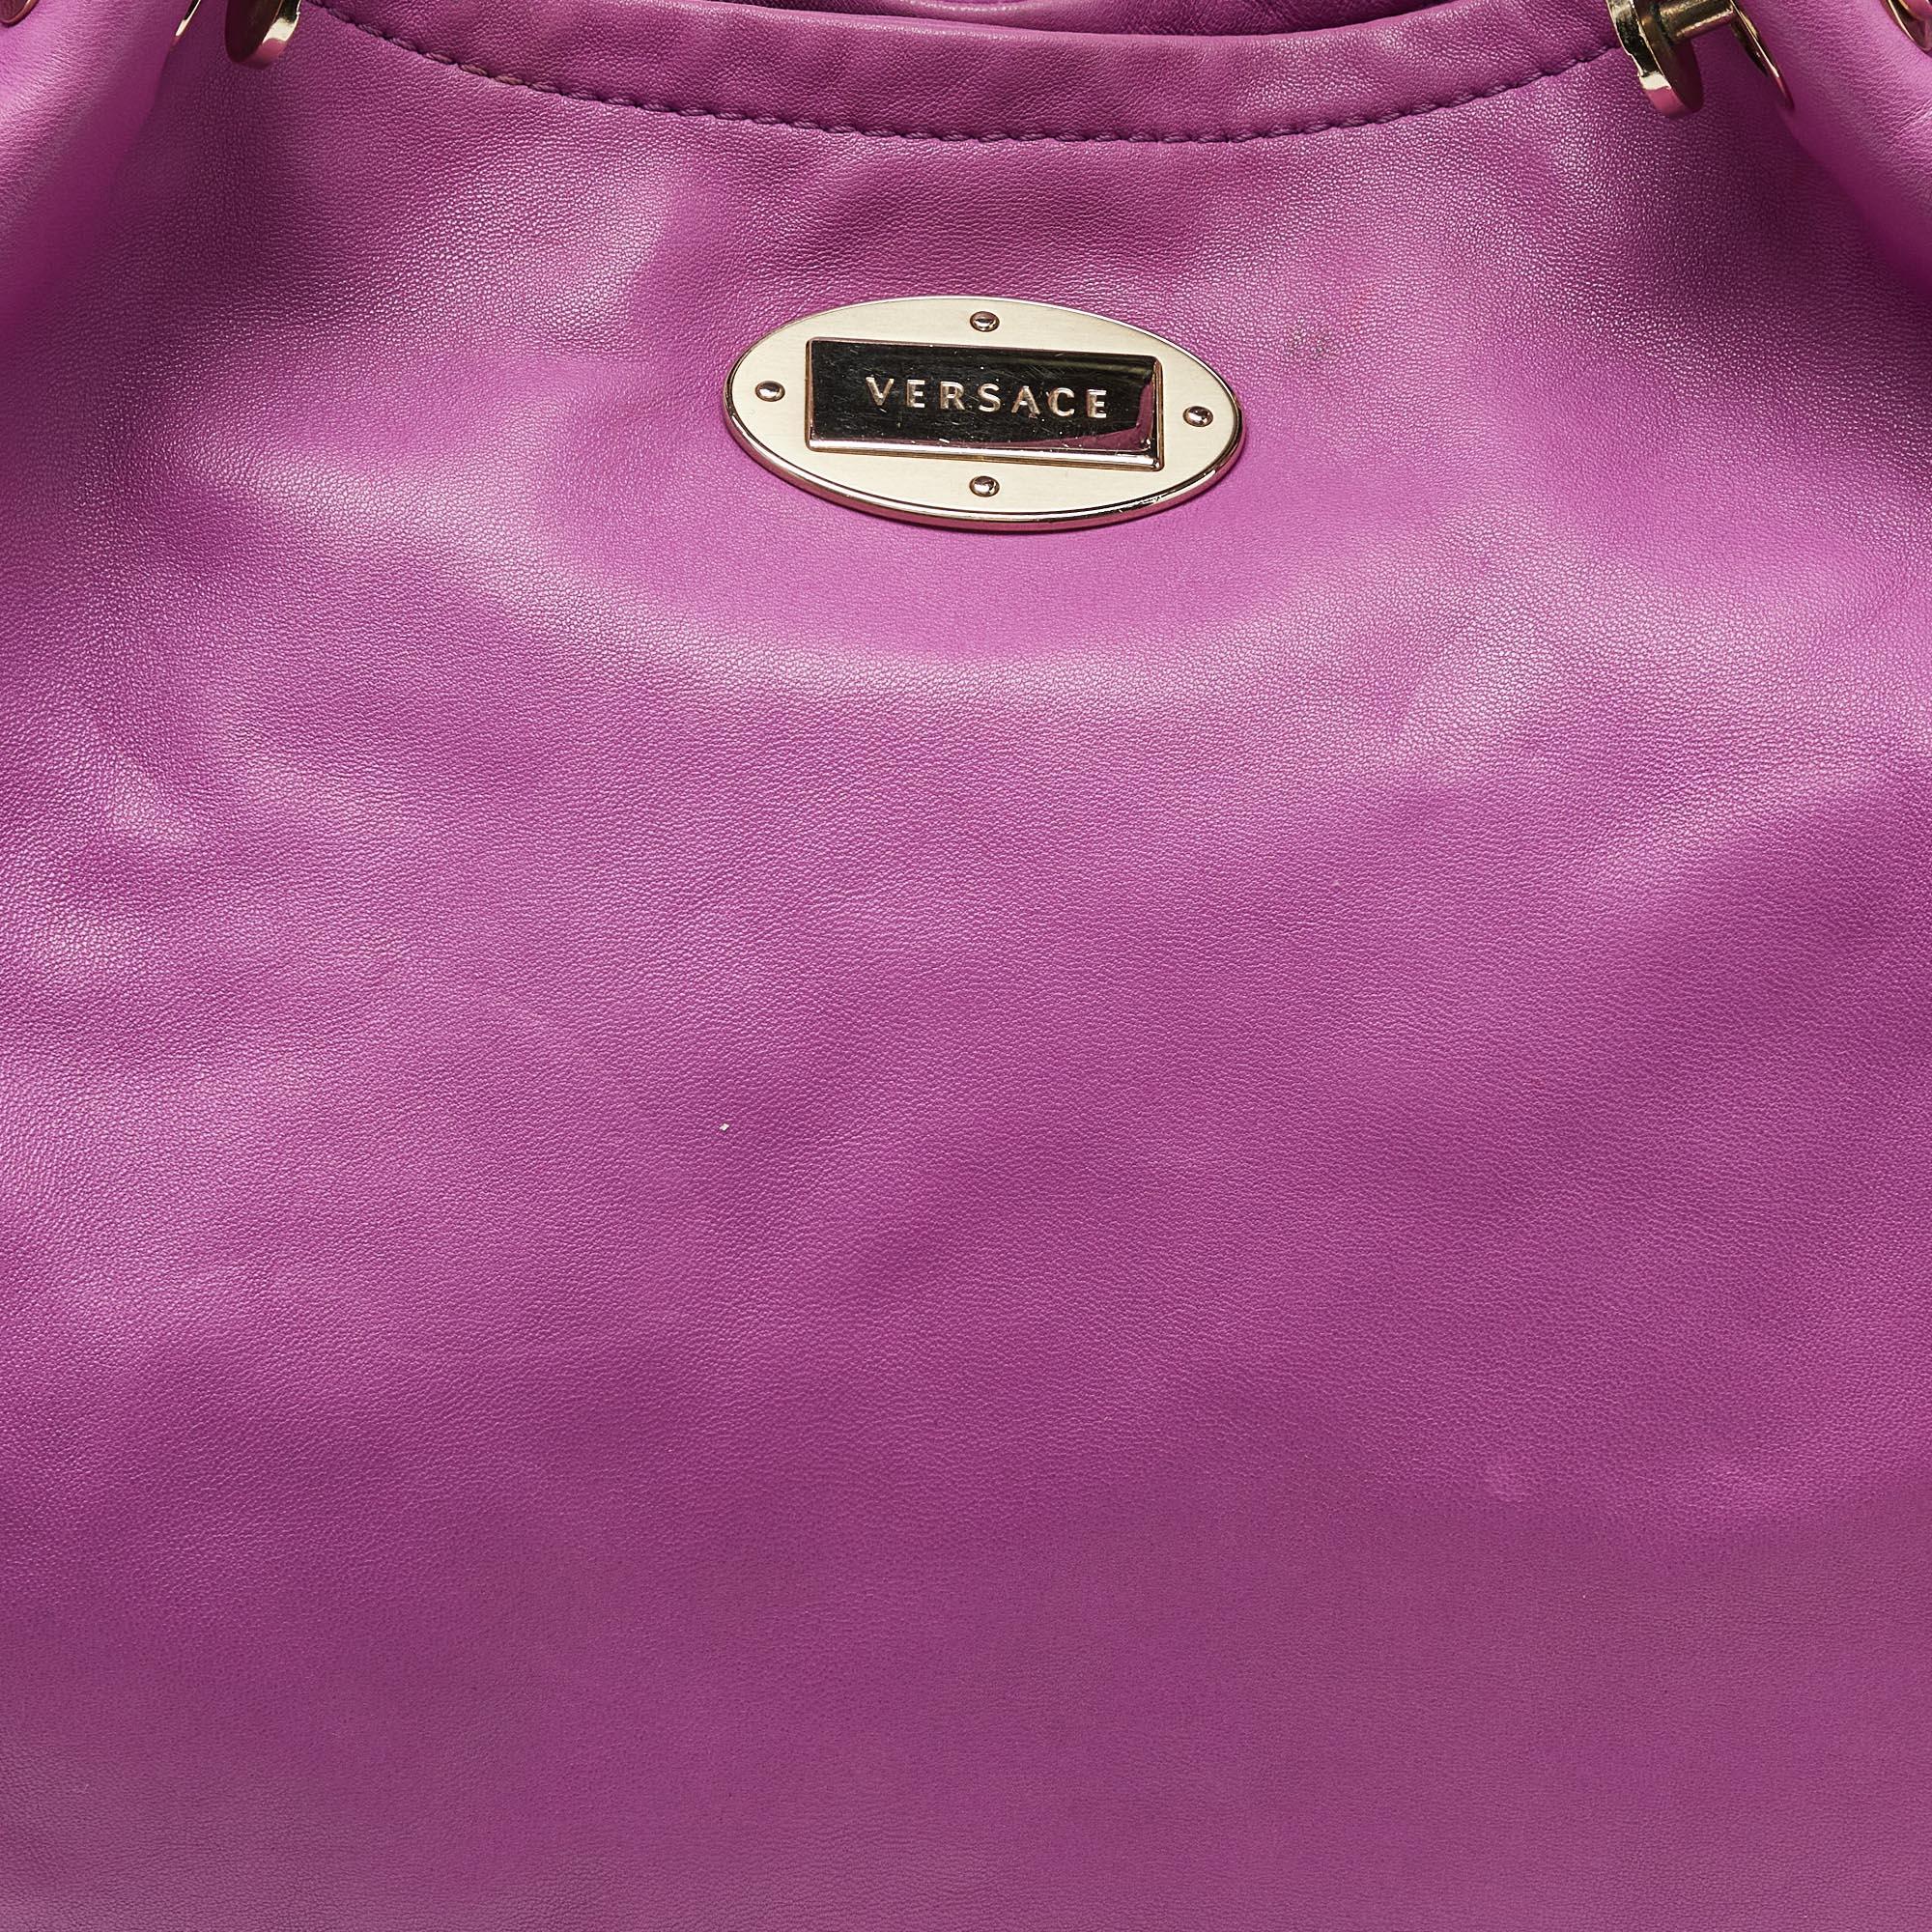 Versace Pink Pleated Leather Chain Satchel For Sale 2